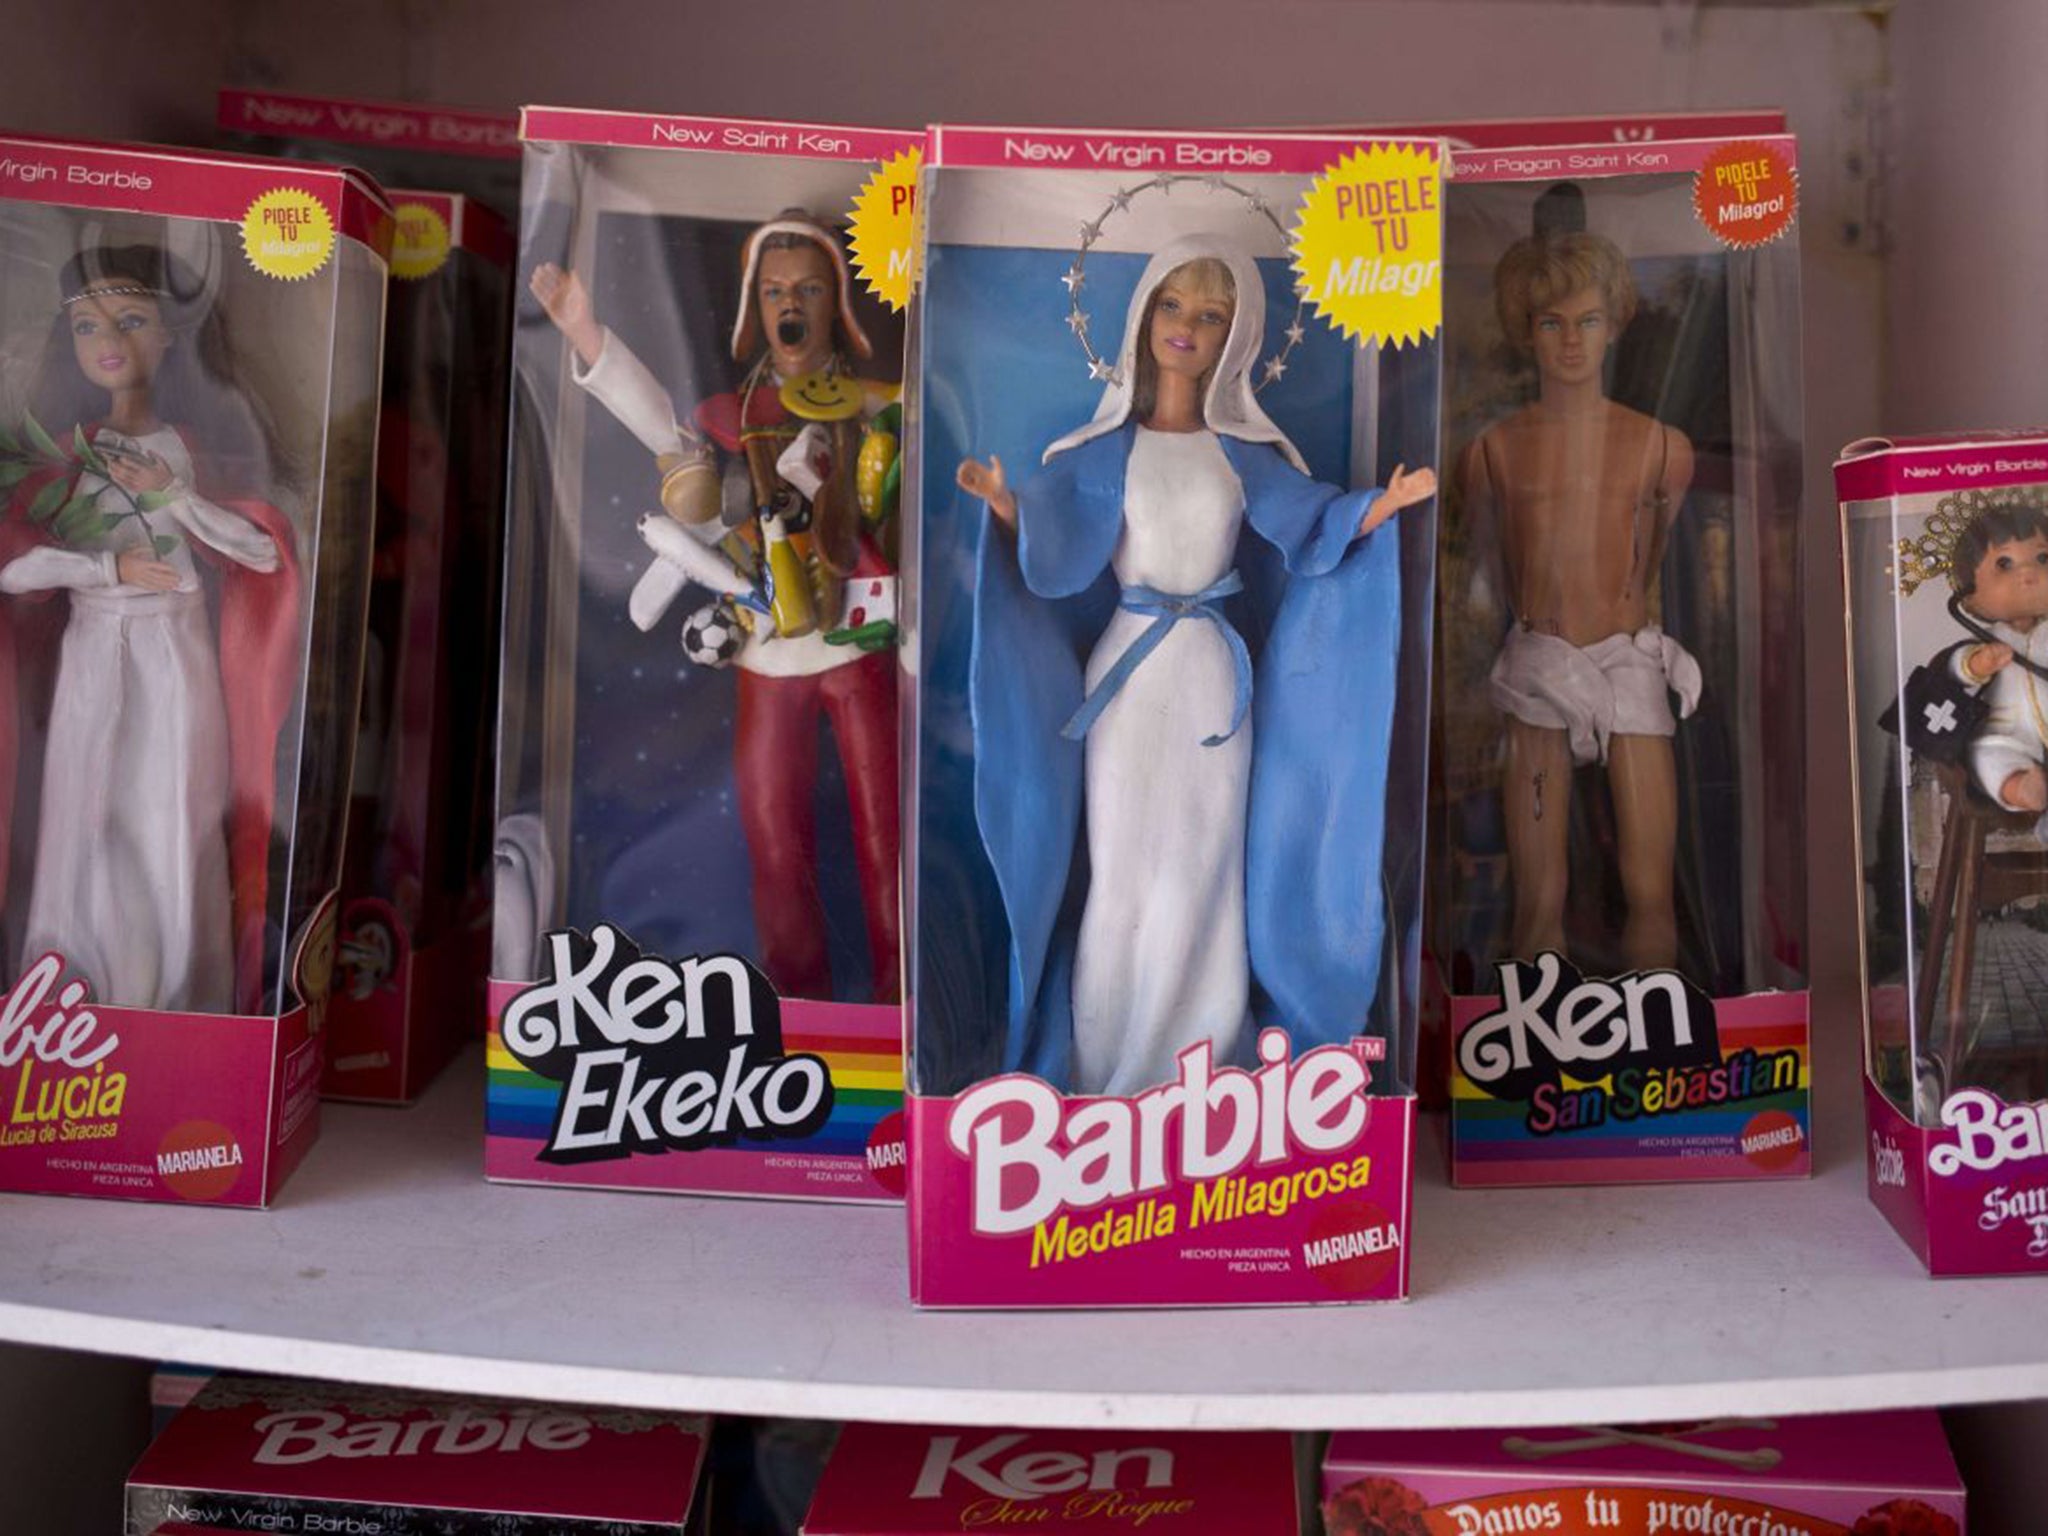 There are some 33 Barbies and Kens going on display as part of the ‘Barbie, the Plastic Religion’ exhibition in Buenos Aires